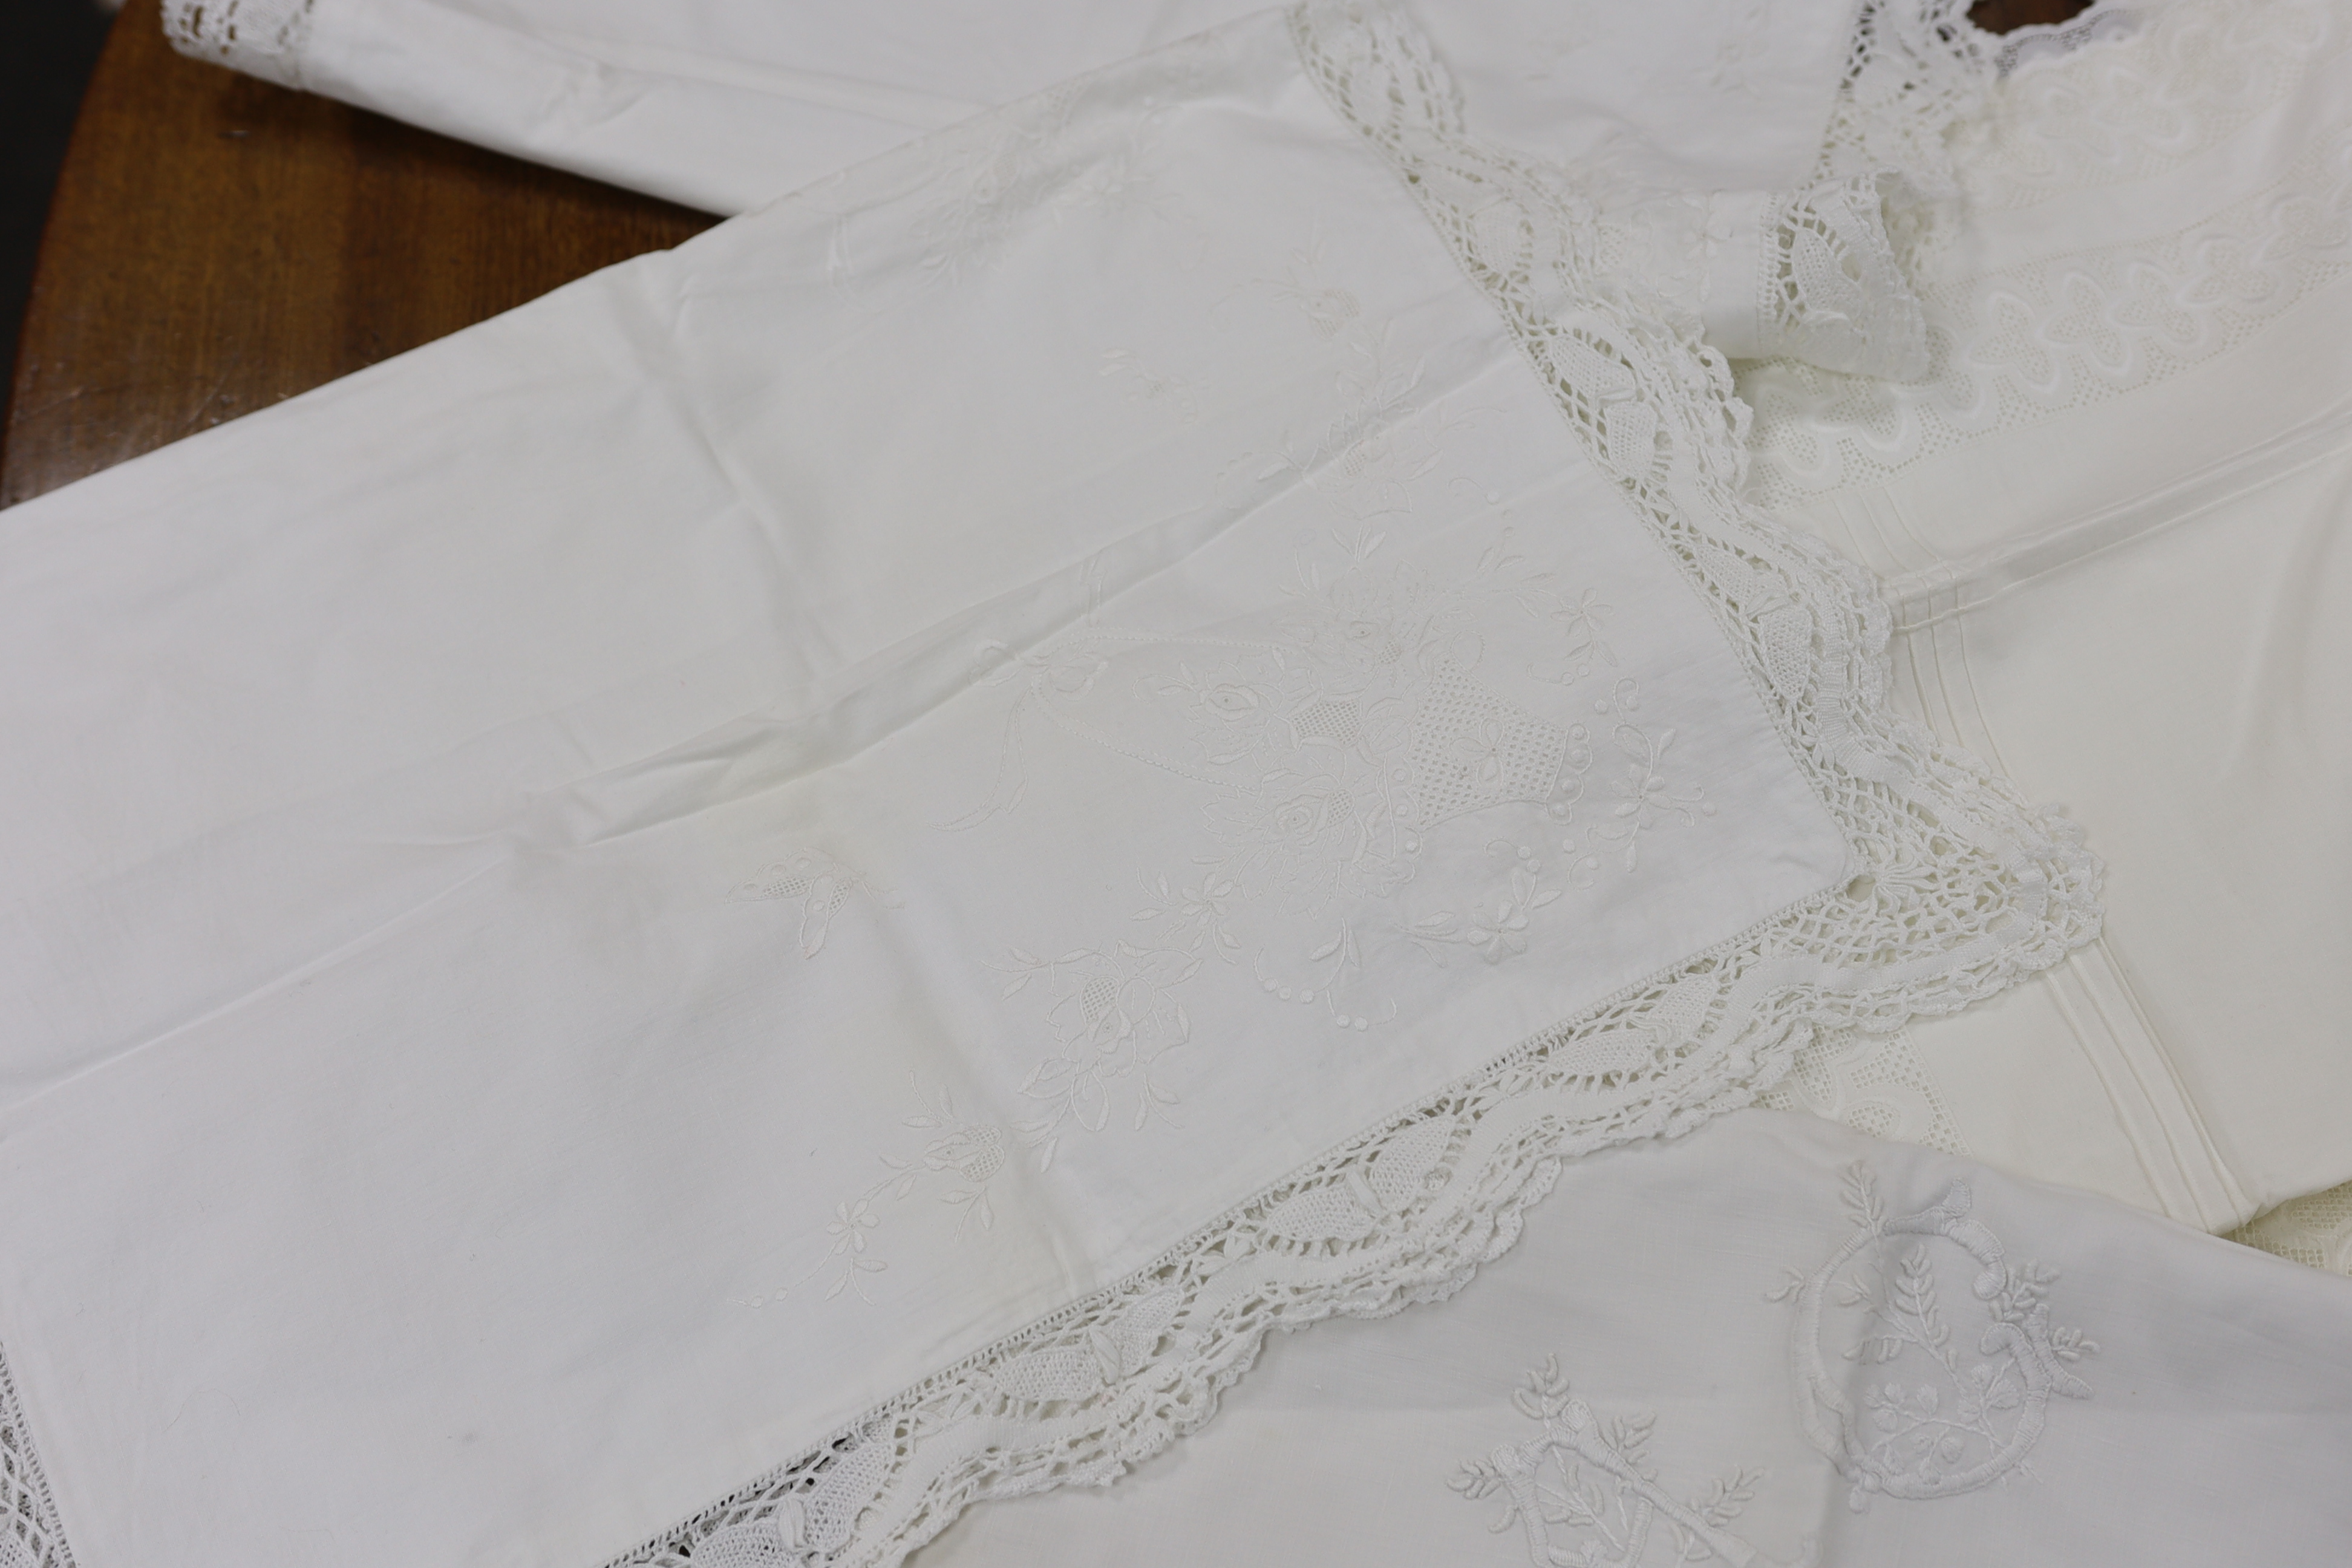 19th-20th century bed linen; a monogrammed sheet, 7ft 6in., and a smaller crochet edged sheet, a pair of French square Anglaise pillow cases, three similar appliqué pillow cases, a frilled single square pillow case and a